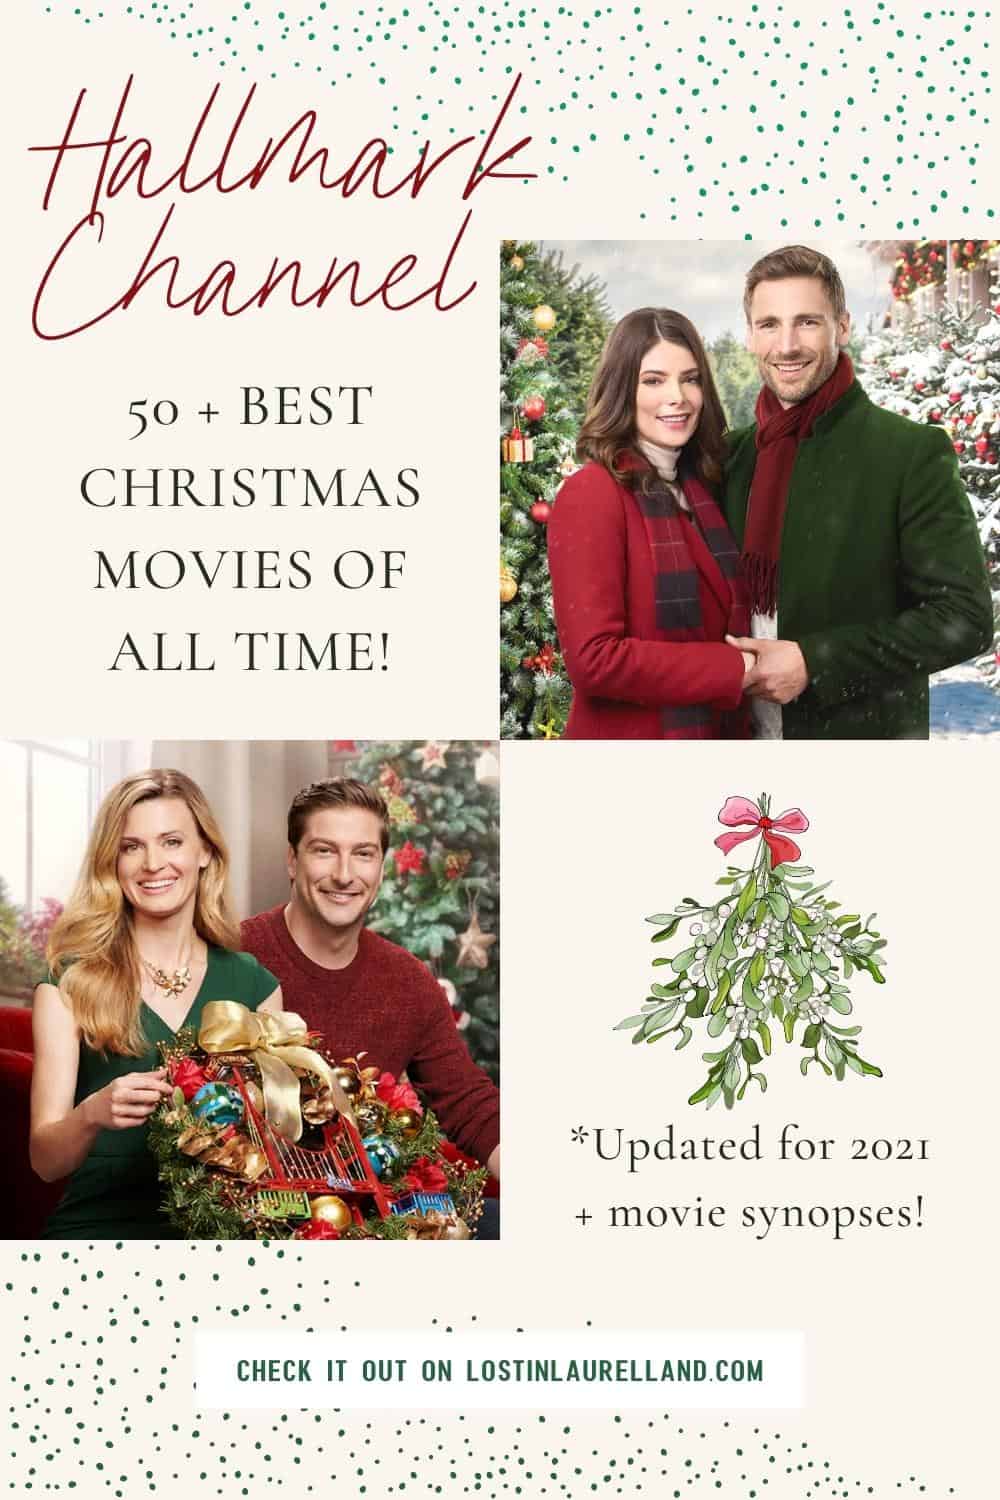 Greatest Hallmark Christmas Movies To Watch in 2022